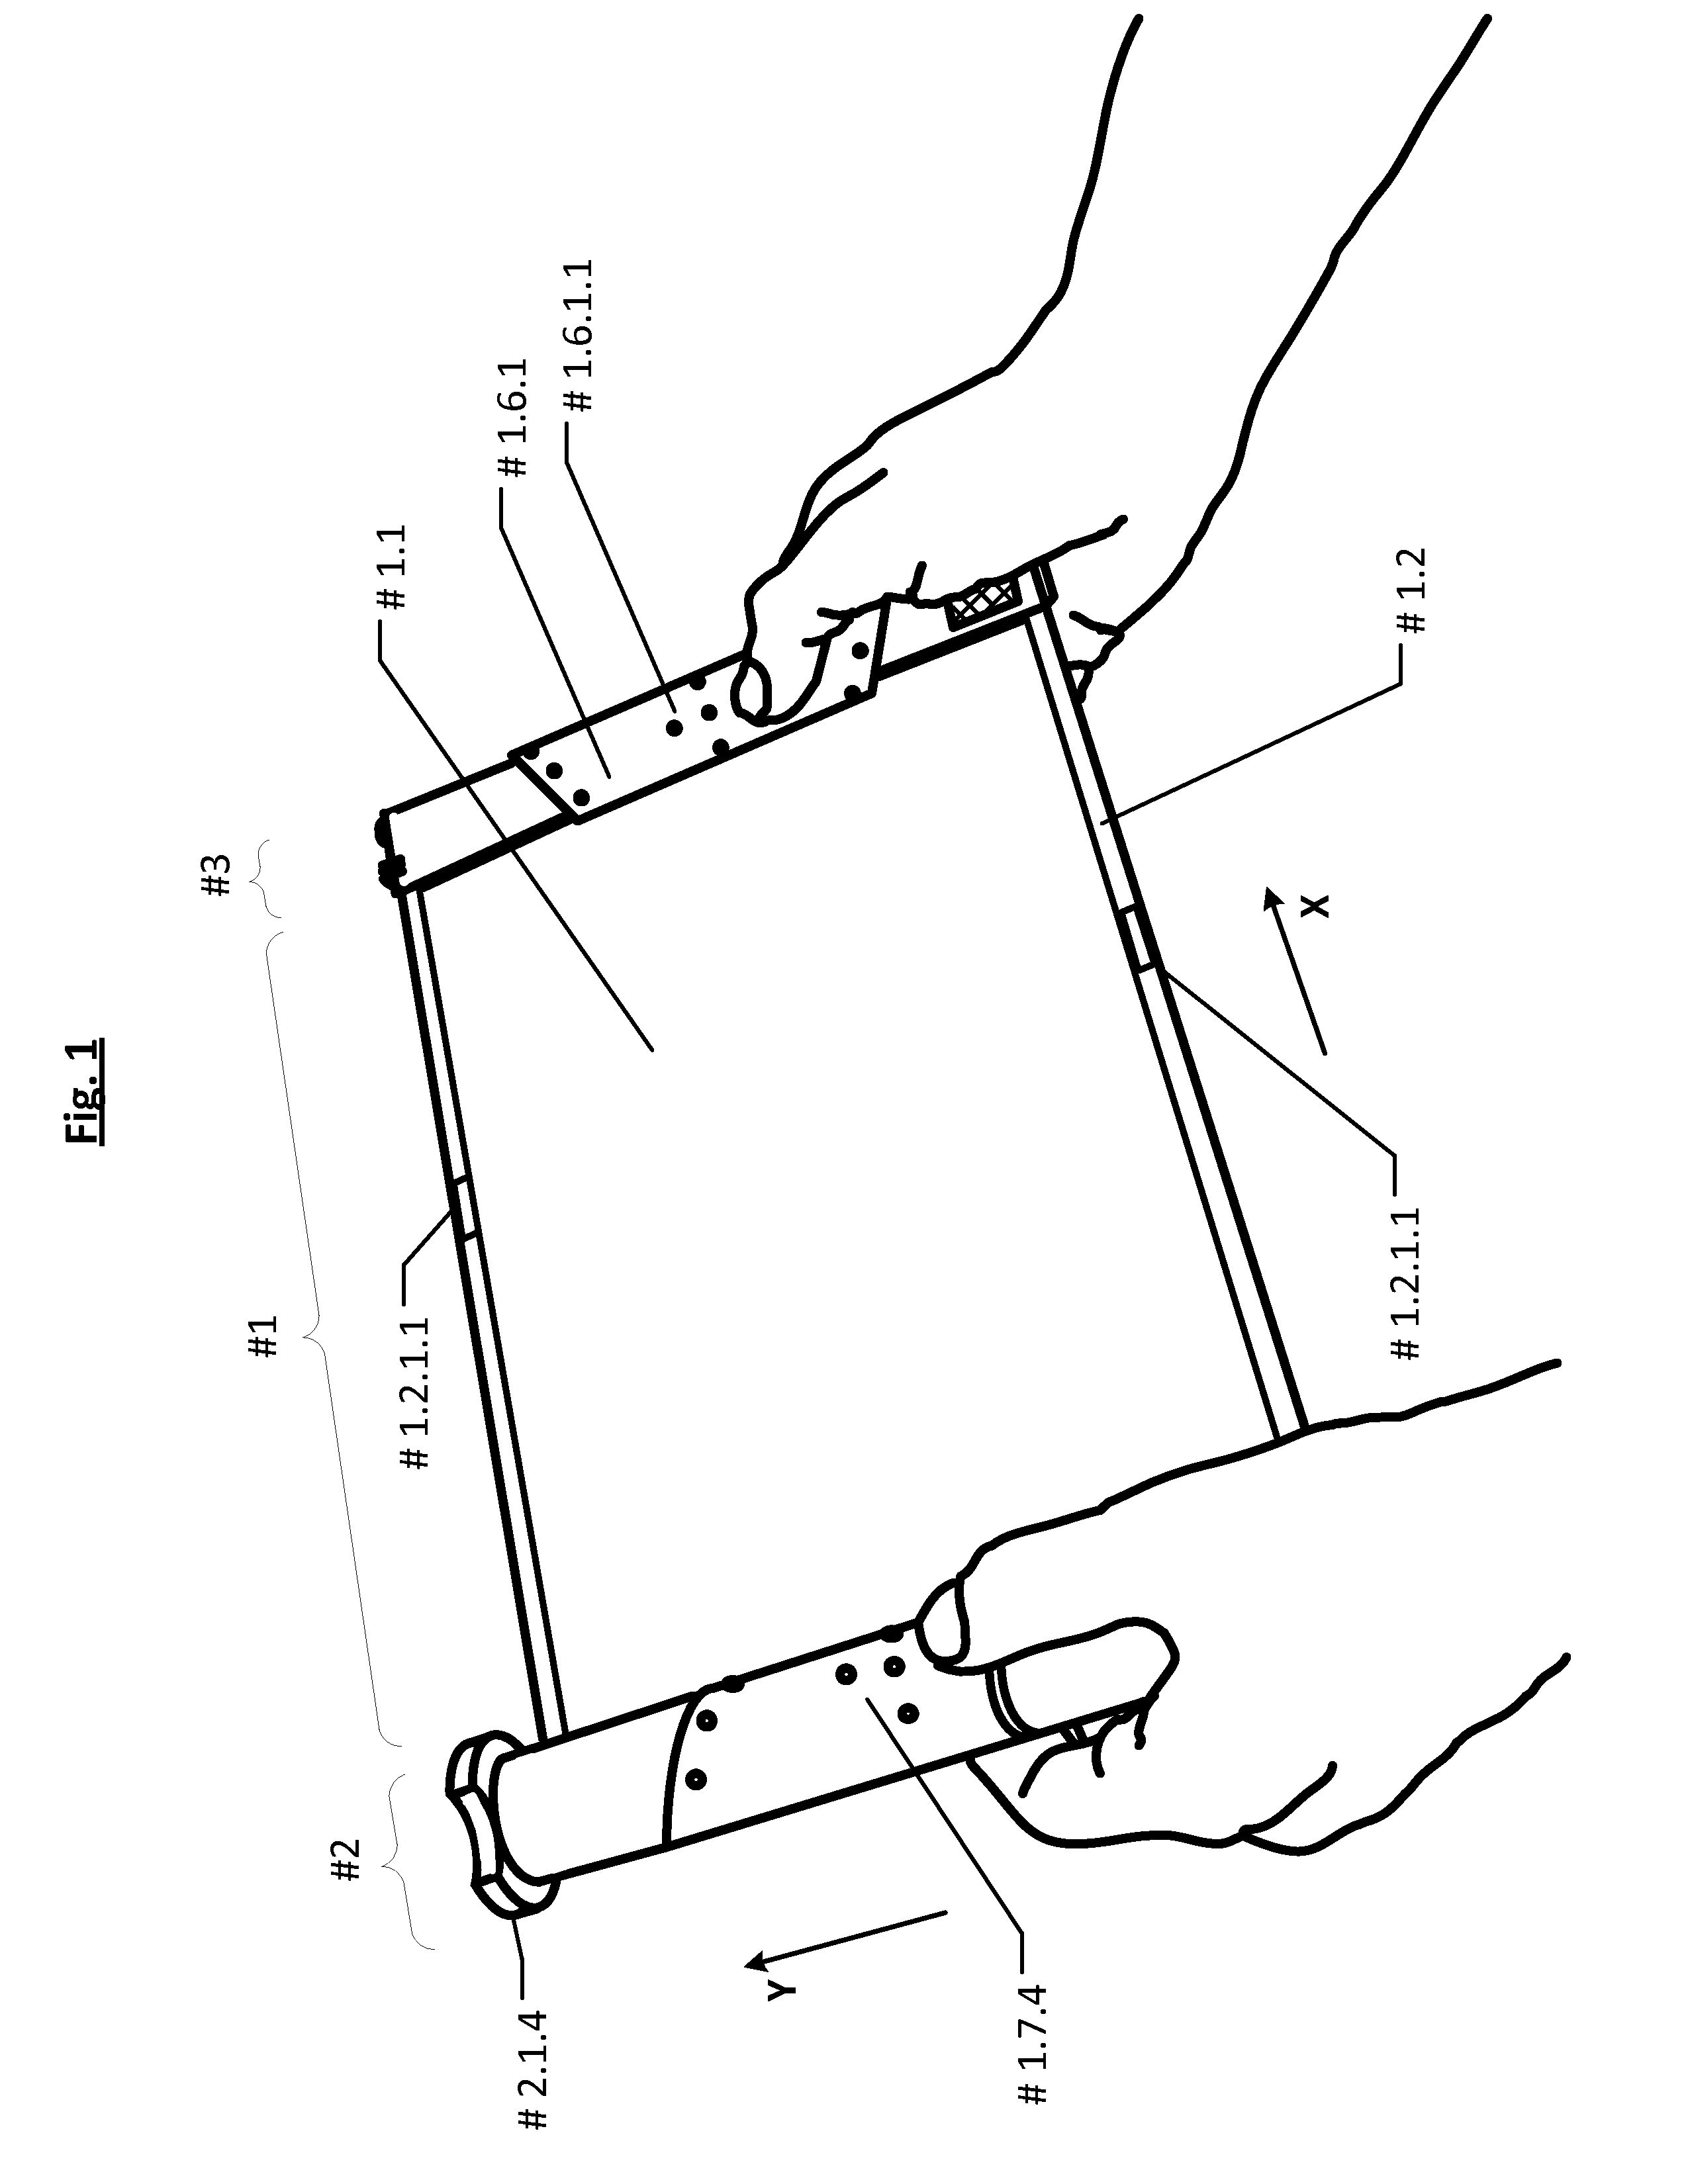 Portable computer-communicator device with rollable display